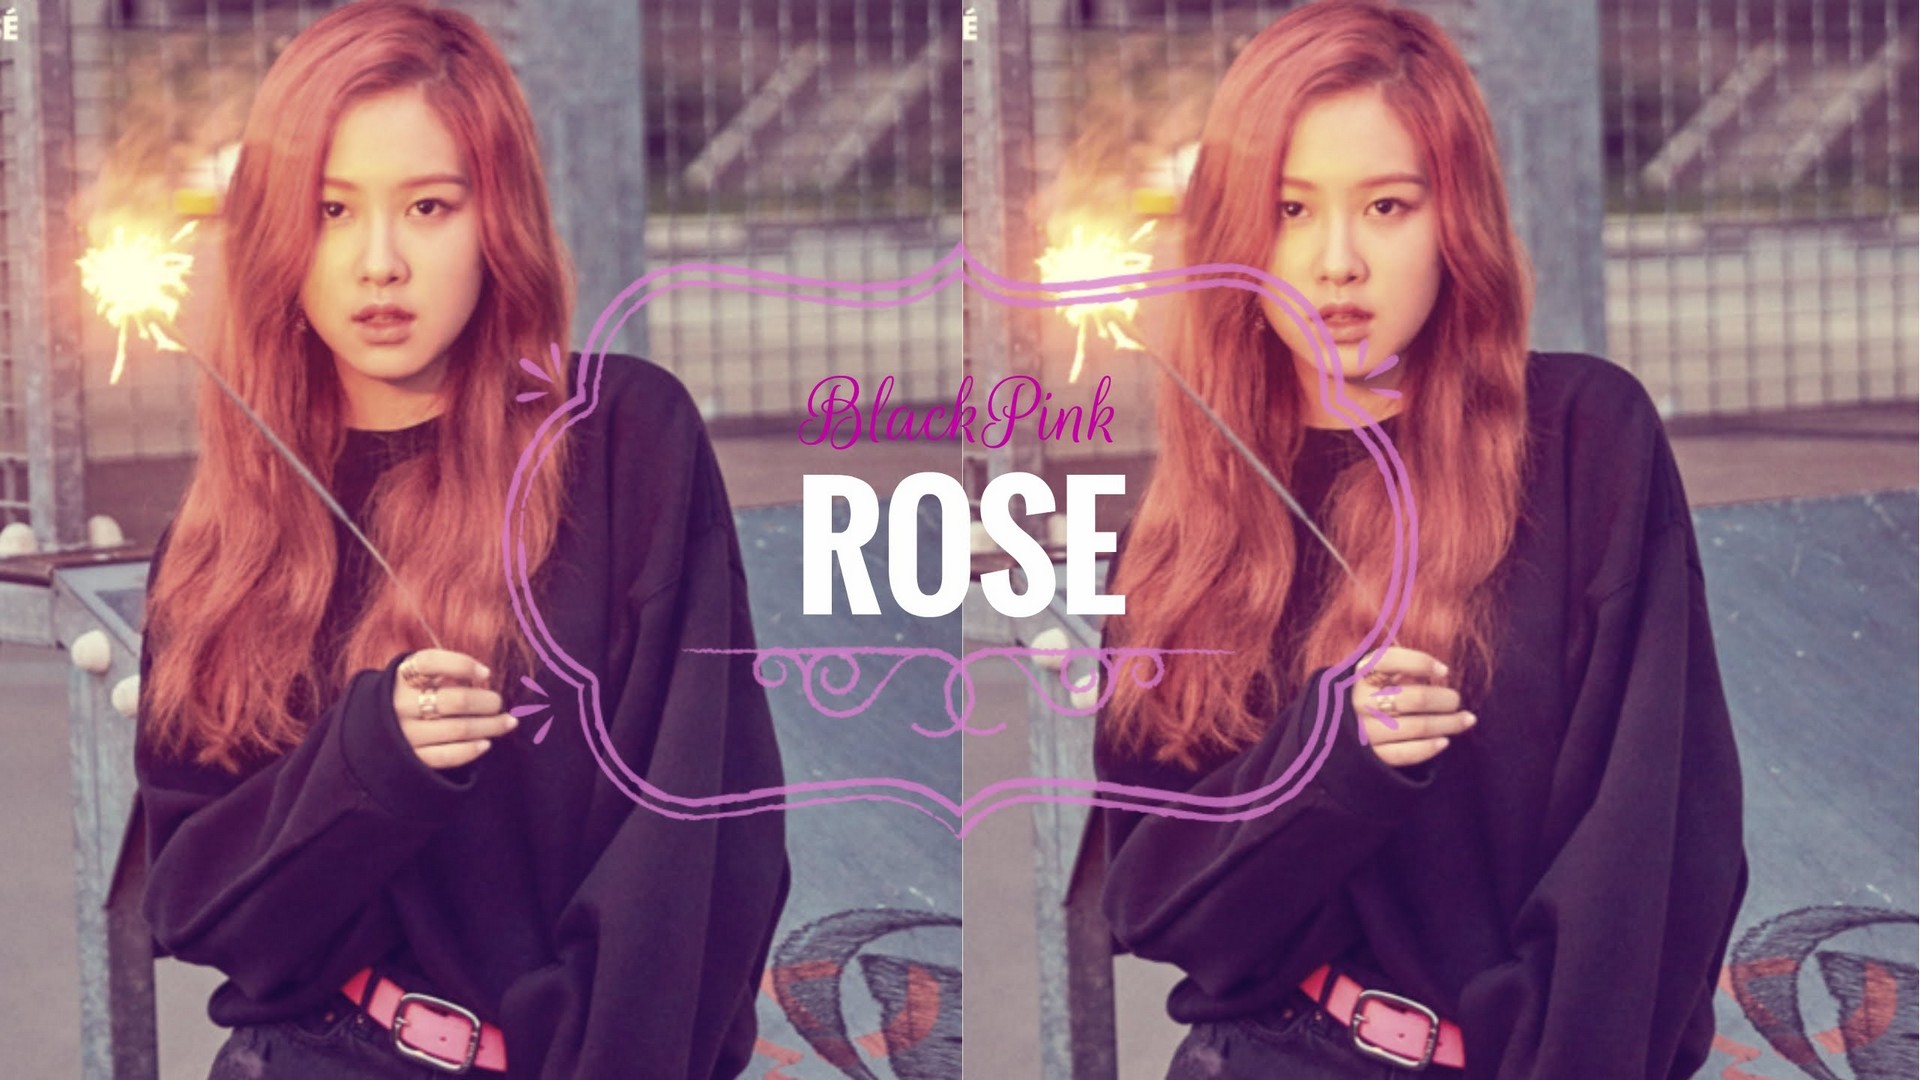 Rosé Blackpink Wallpaper HD Background with high-resolution 1920x1080 pixel. You can use this wallpaper for your Windows and Mac OS computers as well as your Android and iPhone smartphones